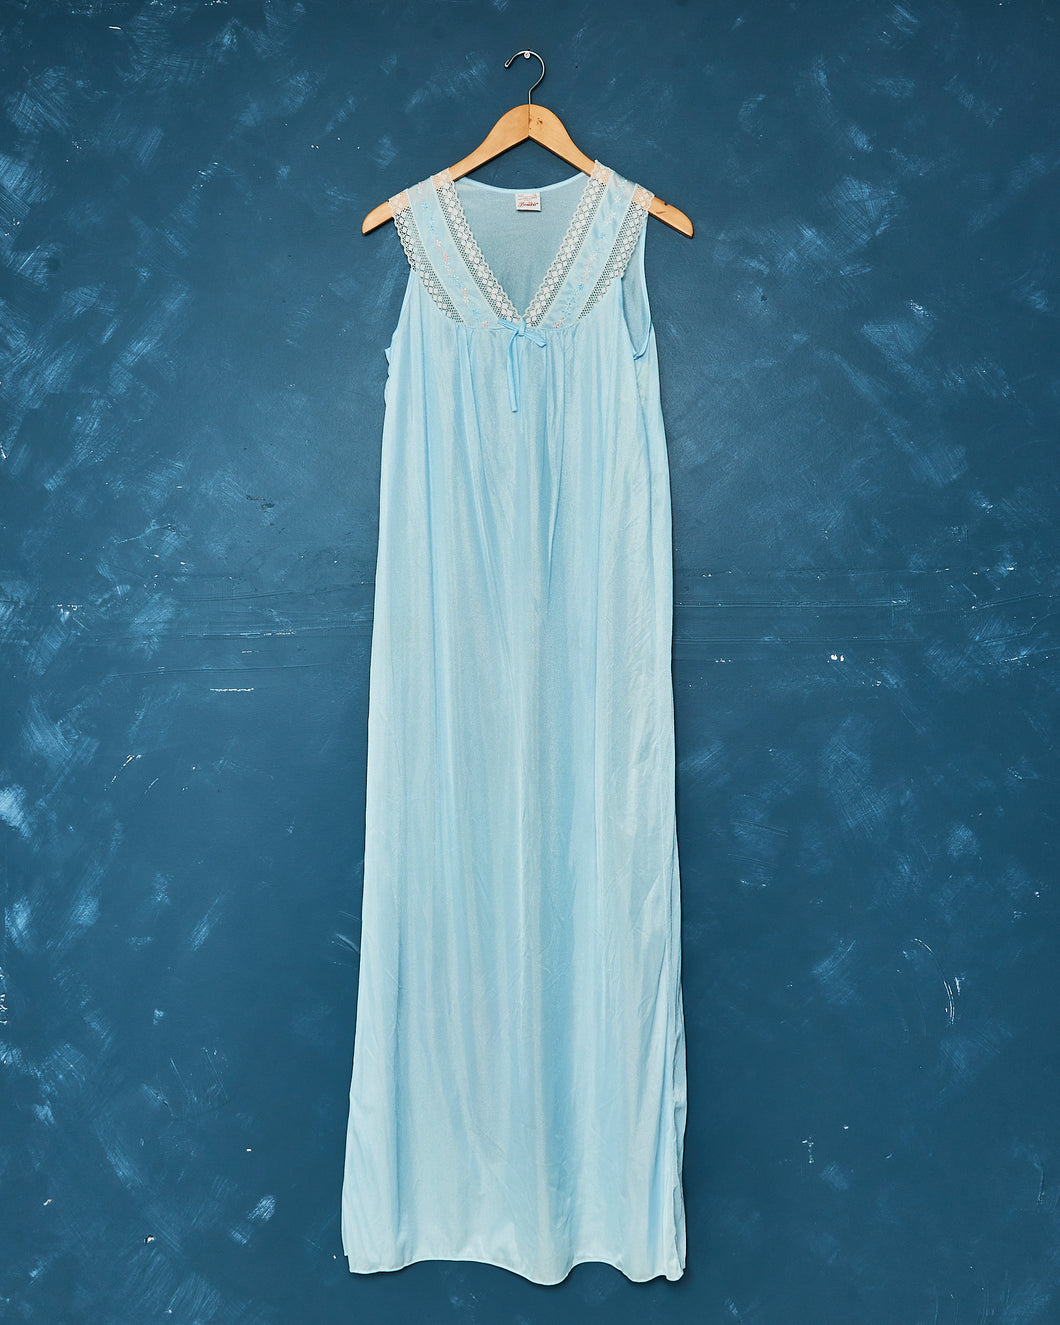 1980s Lace Trim Nightgown